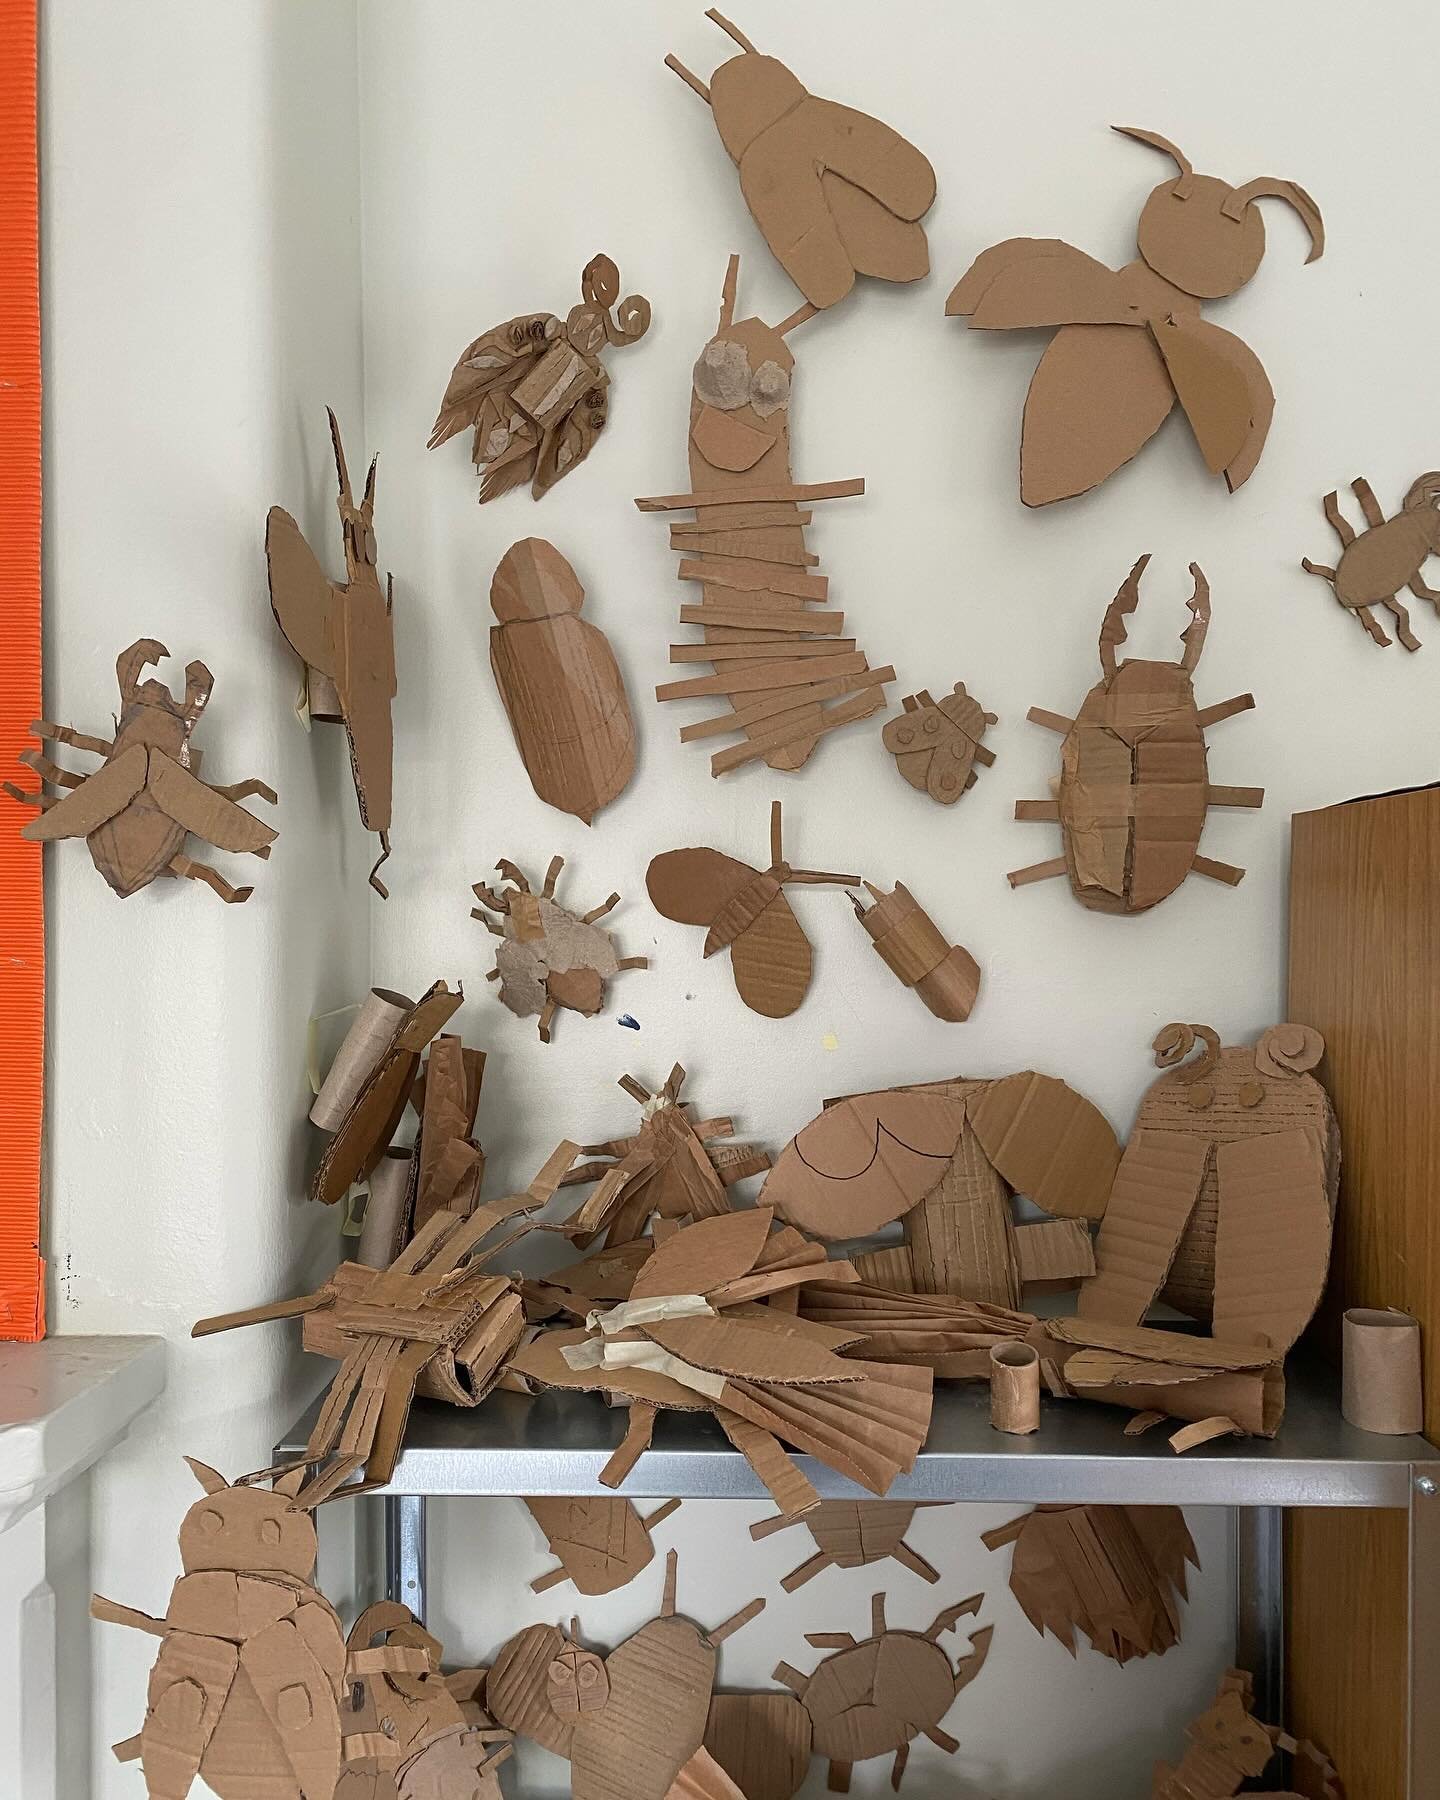 We&rsquo;re back to our brilliant BUGS this week. Using our new knowledge of those tiny, terrifyingly harmless little beasts that we often misunderstand, we are upscaling them, creating our very own species using wonderful versatile cardboard. We sha